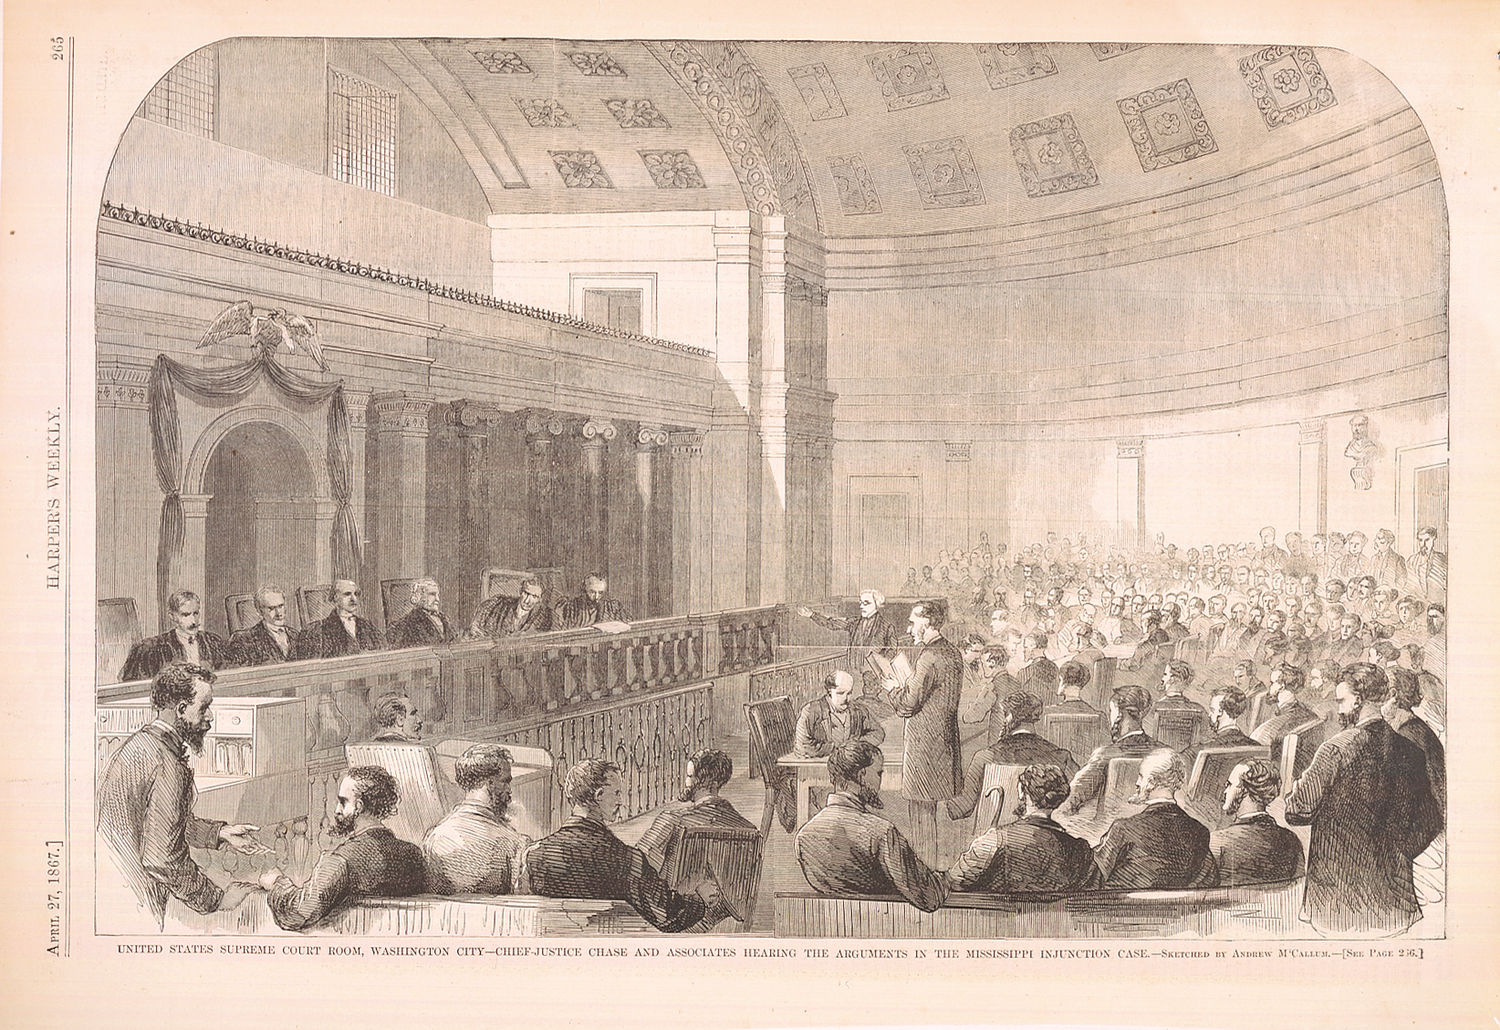 United States Supreme Court Room, Washington City—Chief-Justice Chase and Associates Hearing the Arguments in the Mississippi Injunction Case. (Acc. No. 38.00213.002)